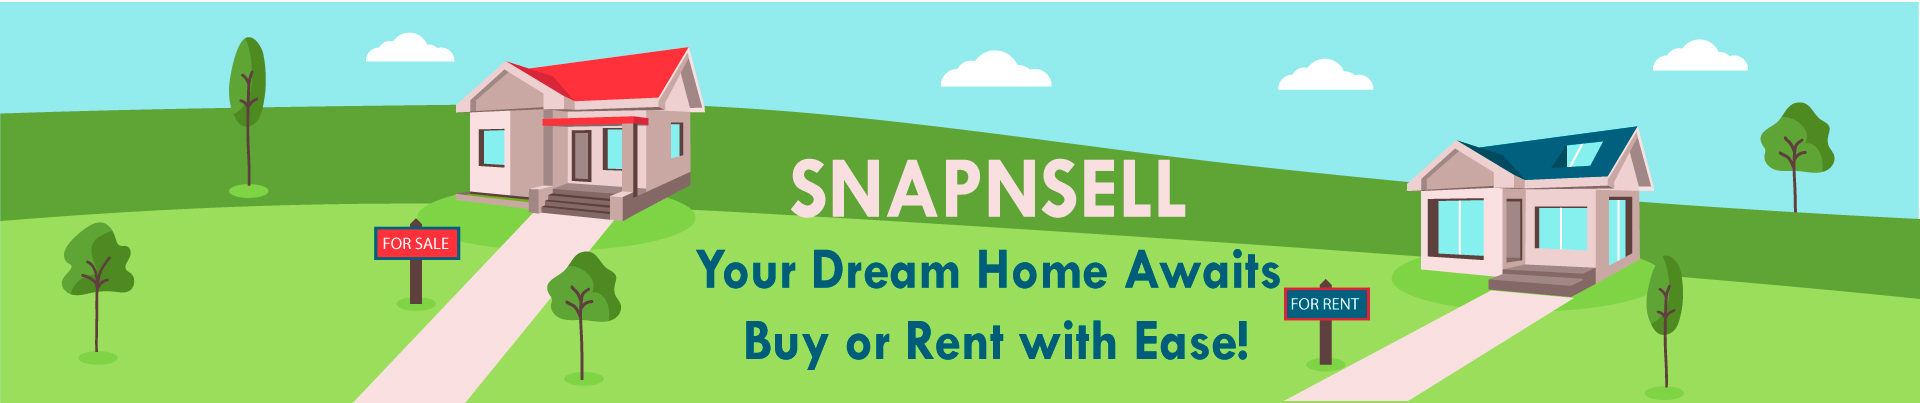 Buy or Rent with Ease!